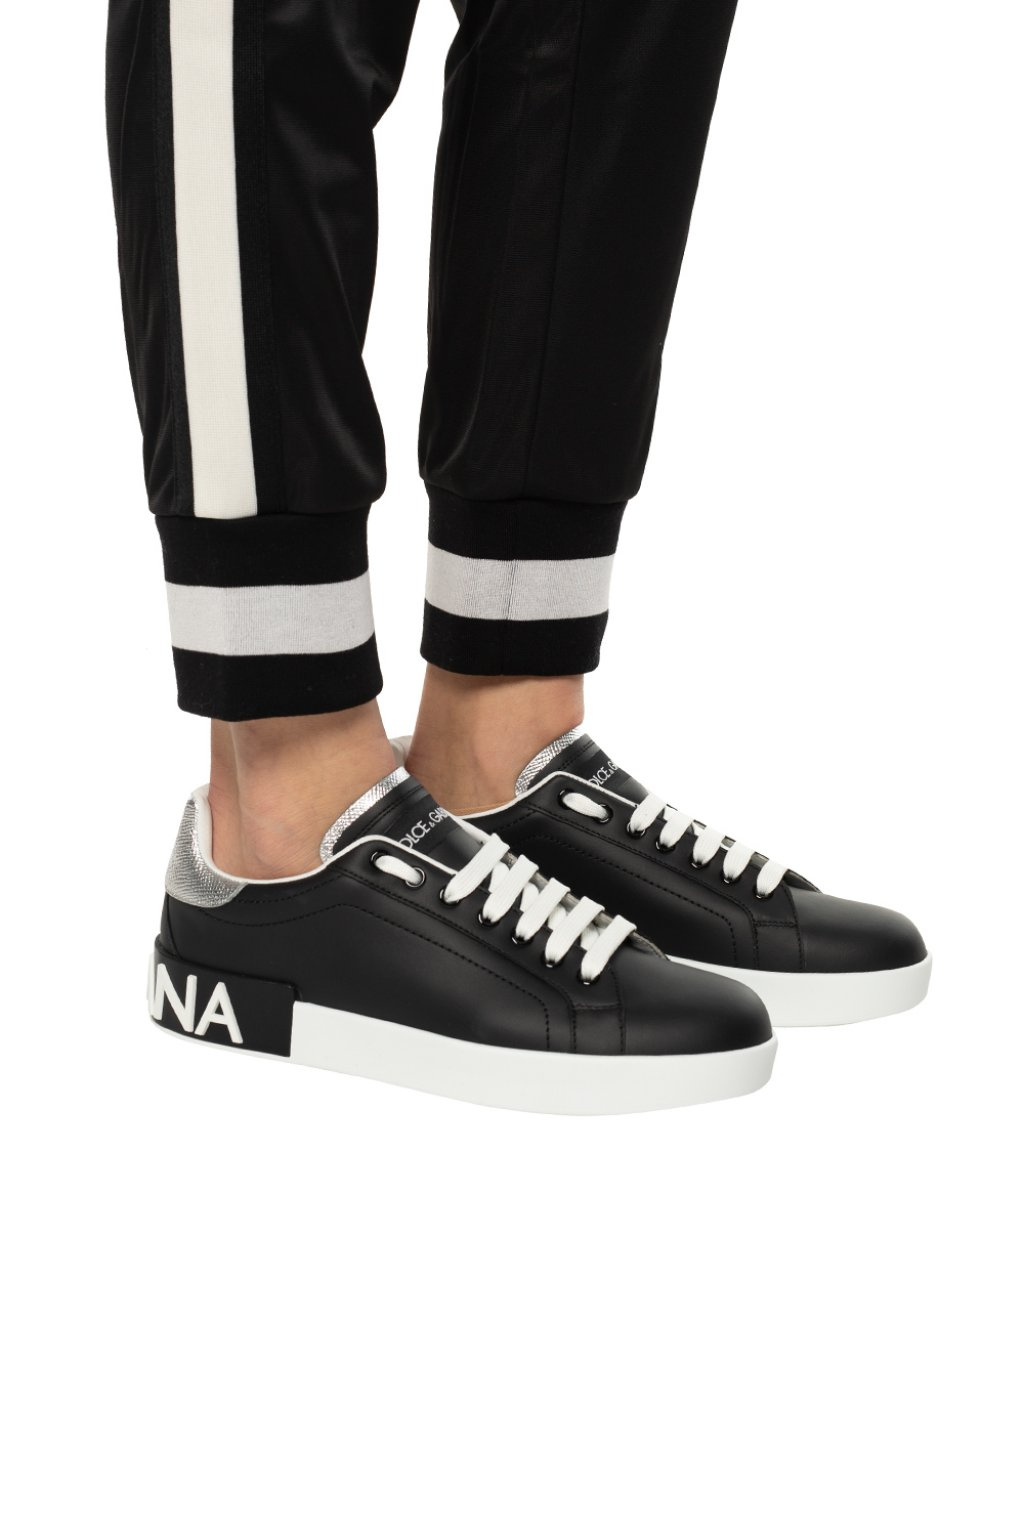 Black calf leather and polyester from DOLCE & GABBANA ‘Portofino’ sneakers